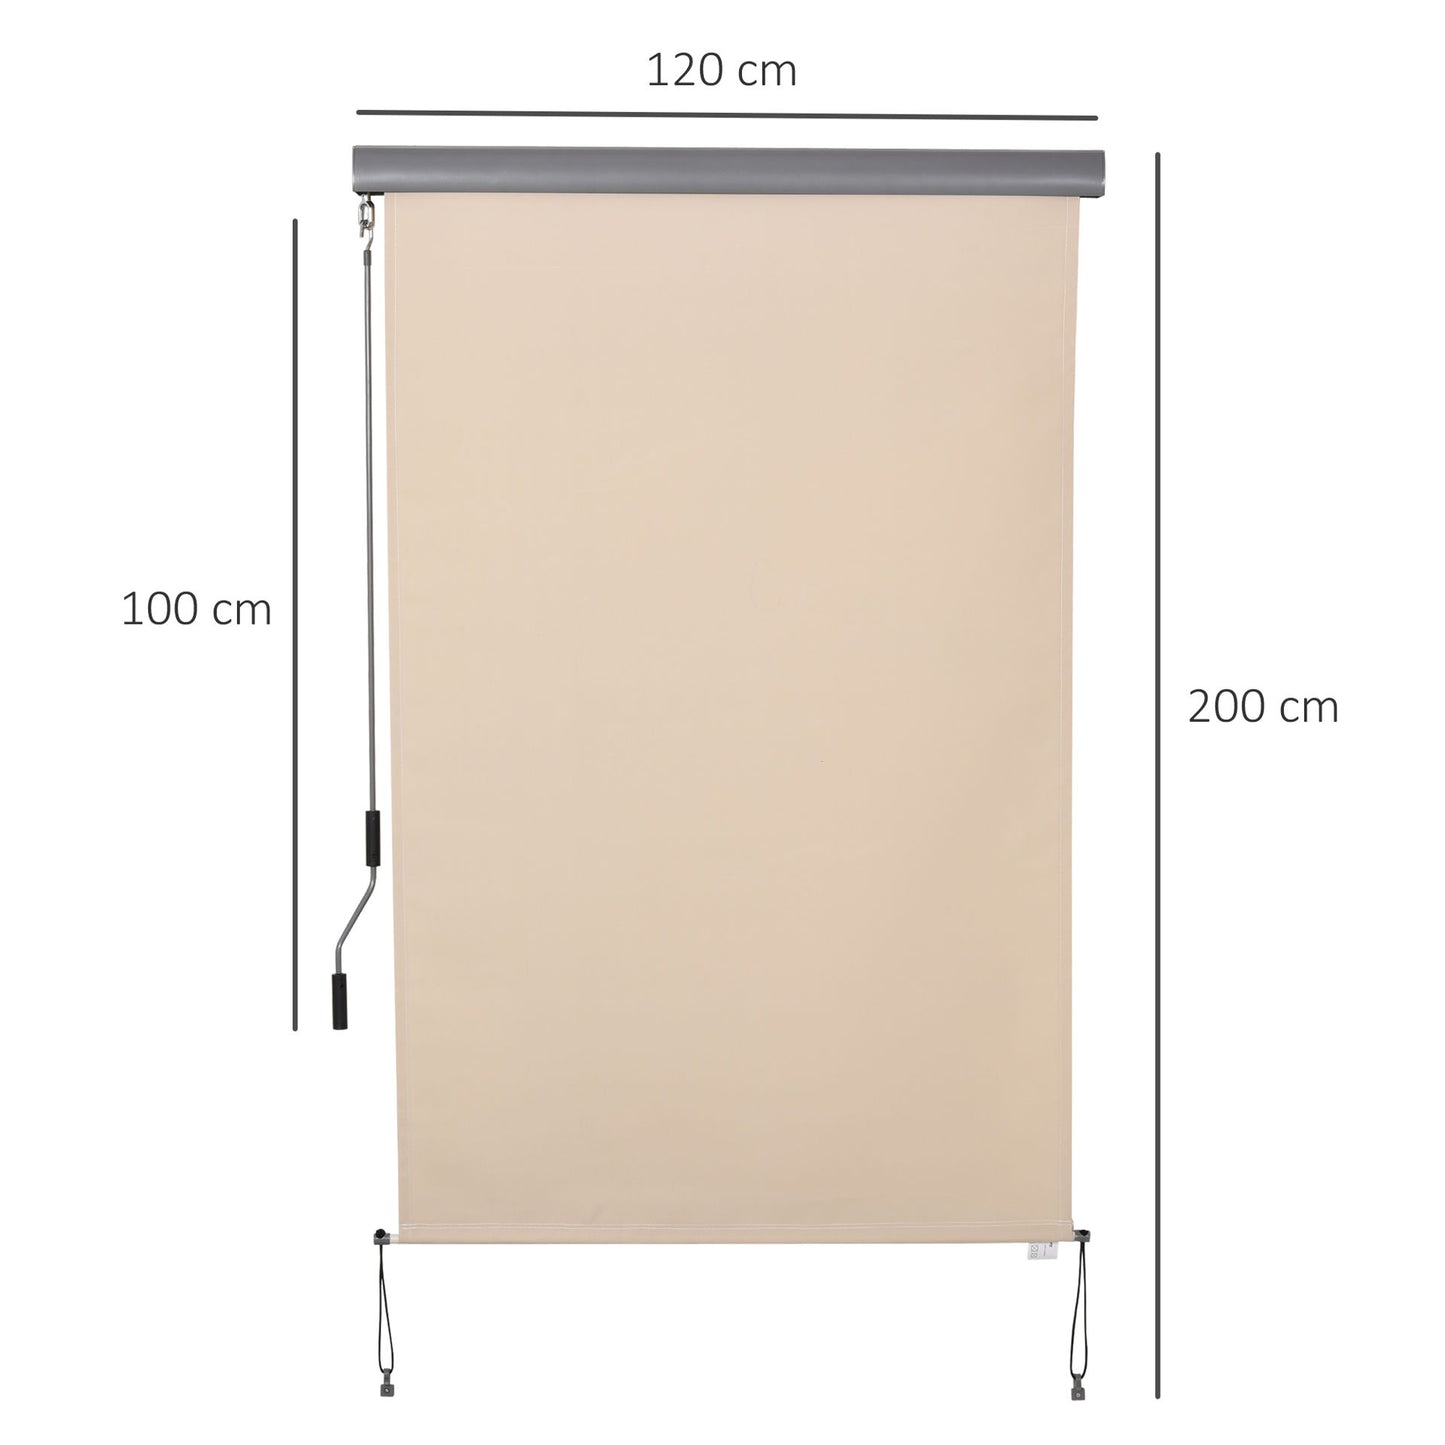 Nancy's Holly Hill Side Canopy Privacy Screen - White - Aluminum, Polyester - 47.24 cm x cm x 78.74 cm